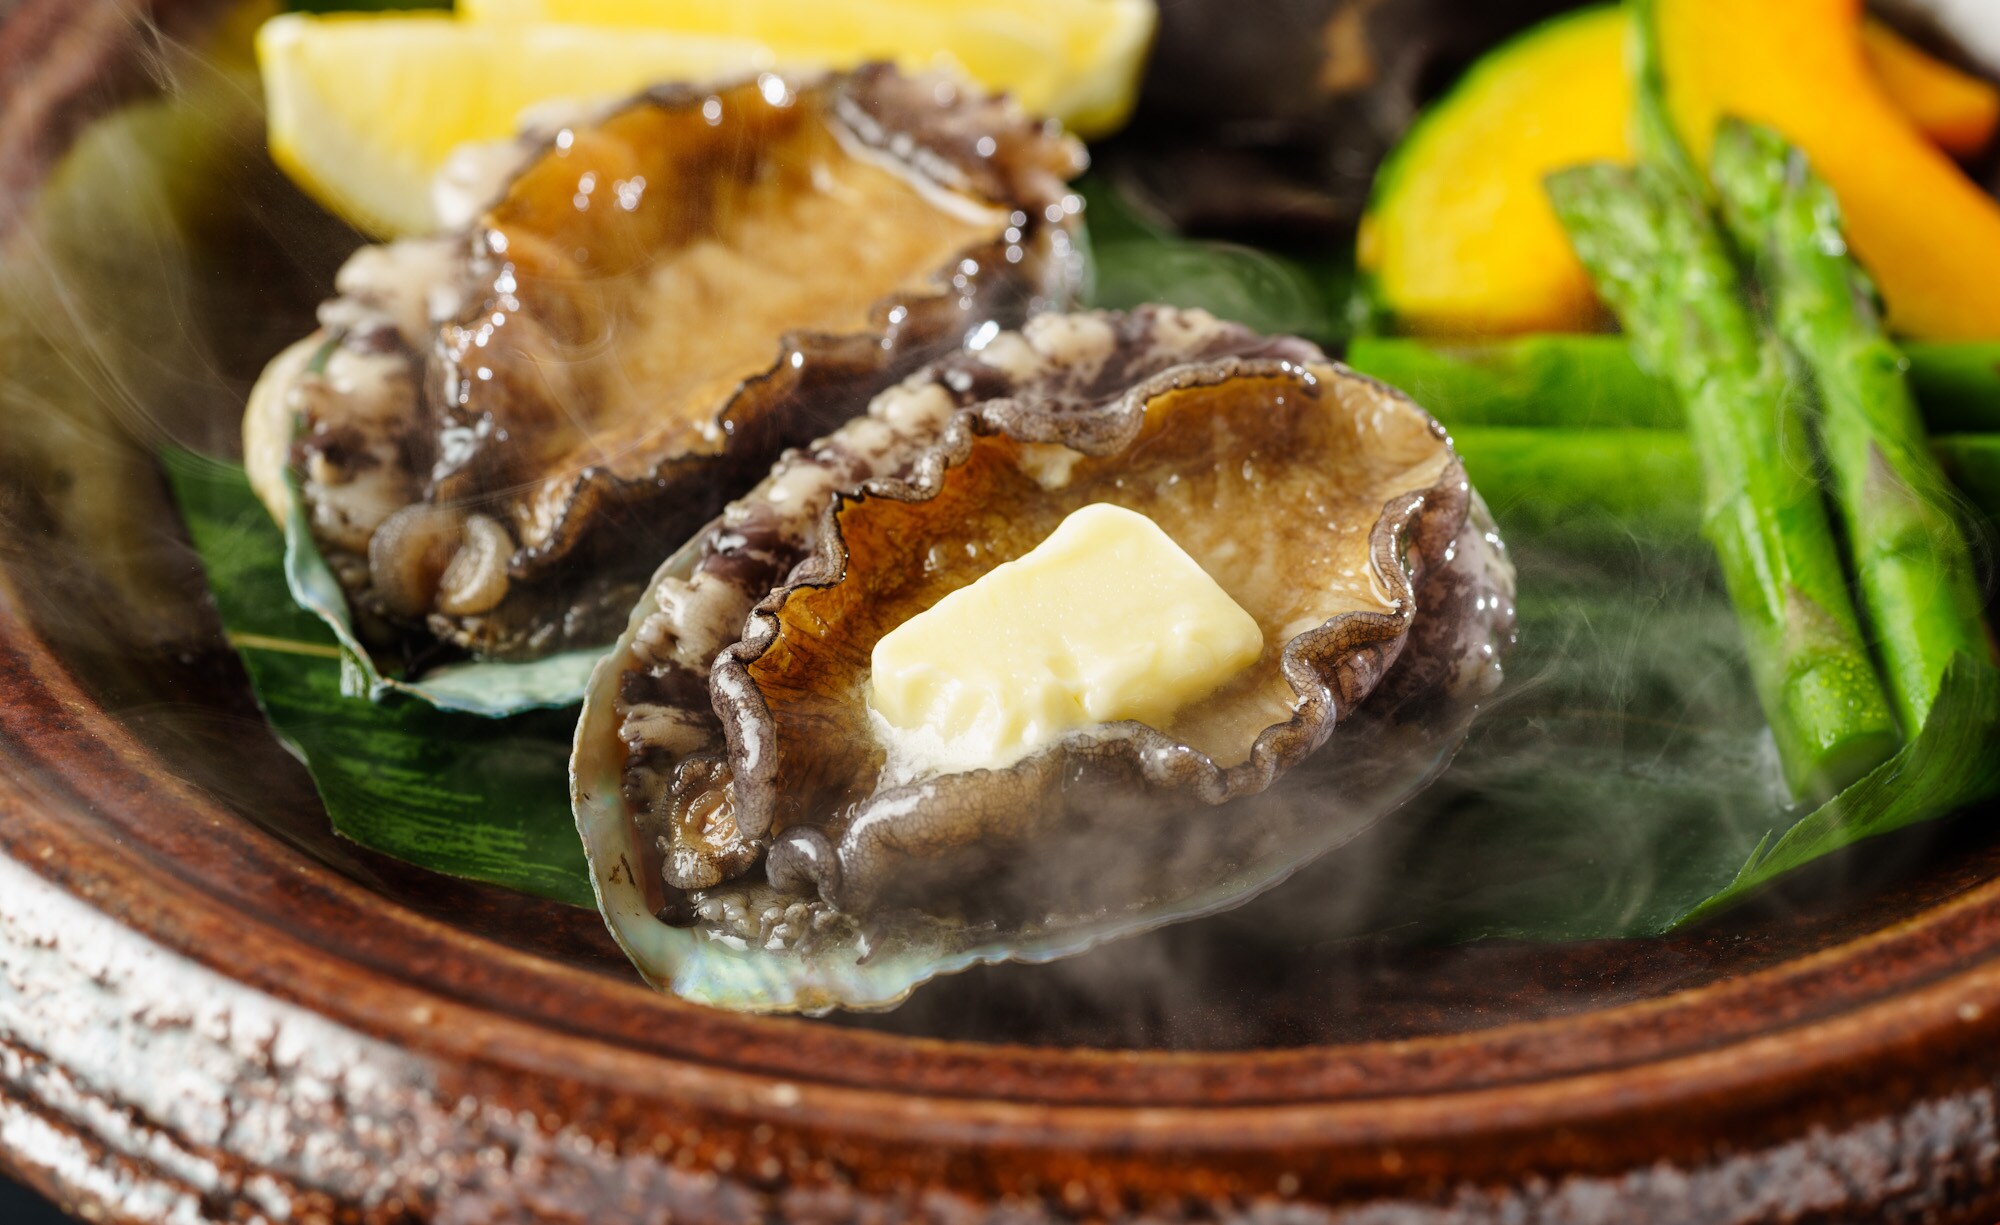 Steamed soft abalone